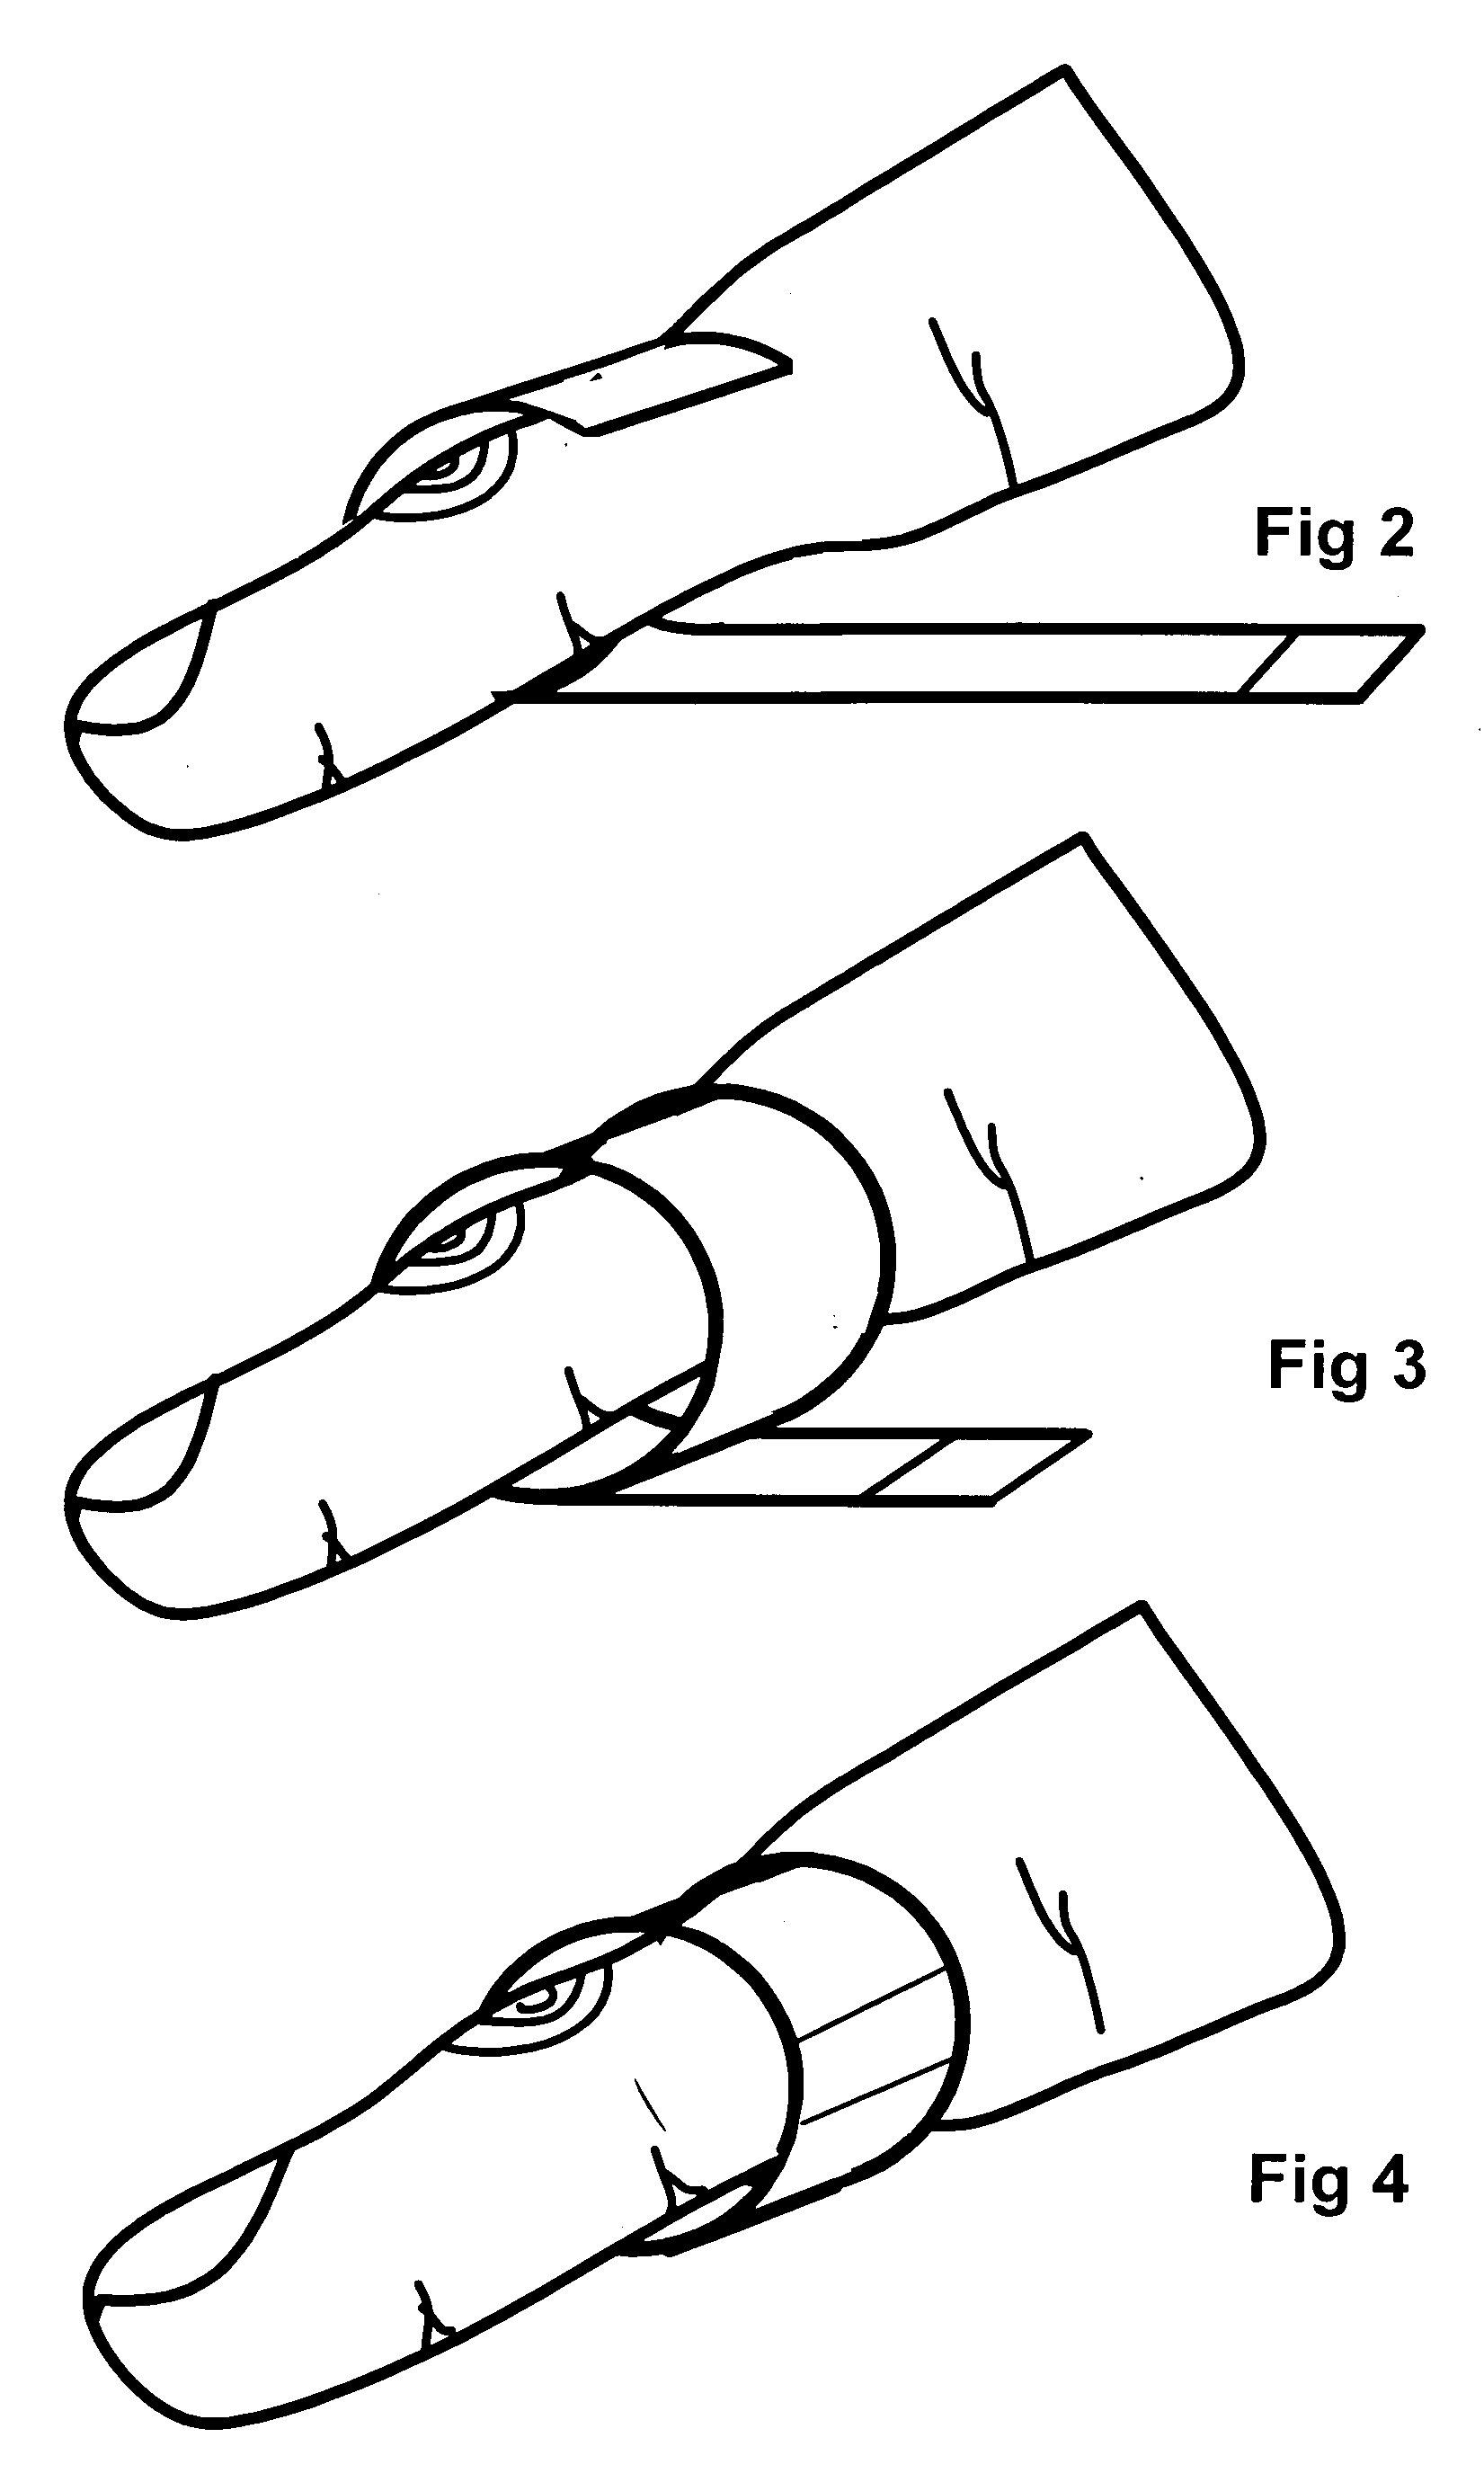 Adjustable, reusable, disposable finger splint to restrict flexion of the phalangeal joints of the hand